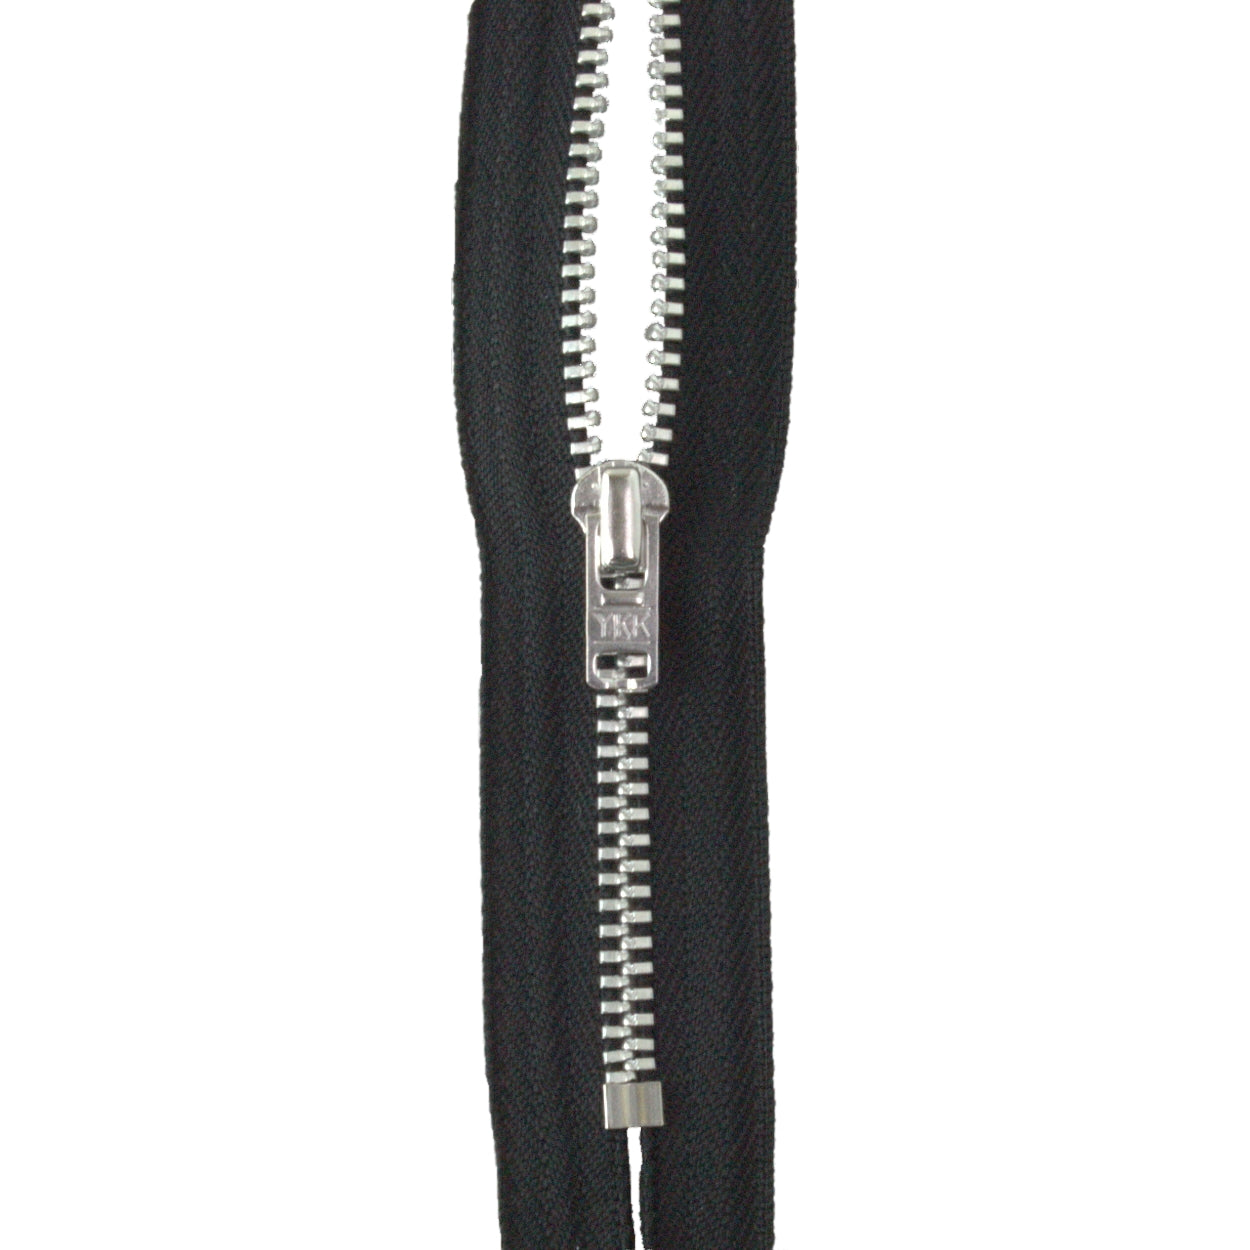 YKK silver tooth Metal Dress Zips - Black from Jaycotts Sewing Supplies